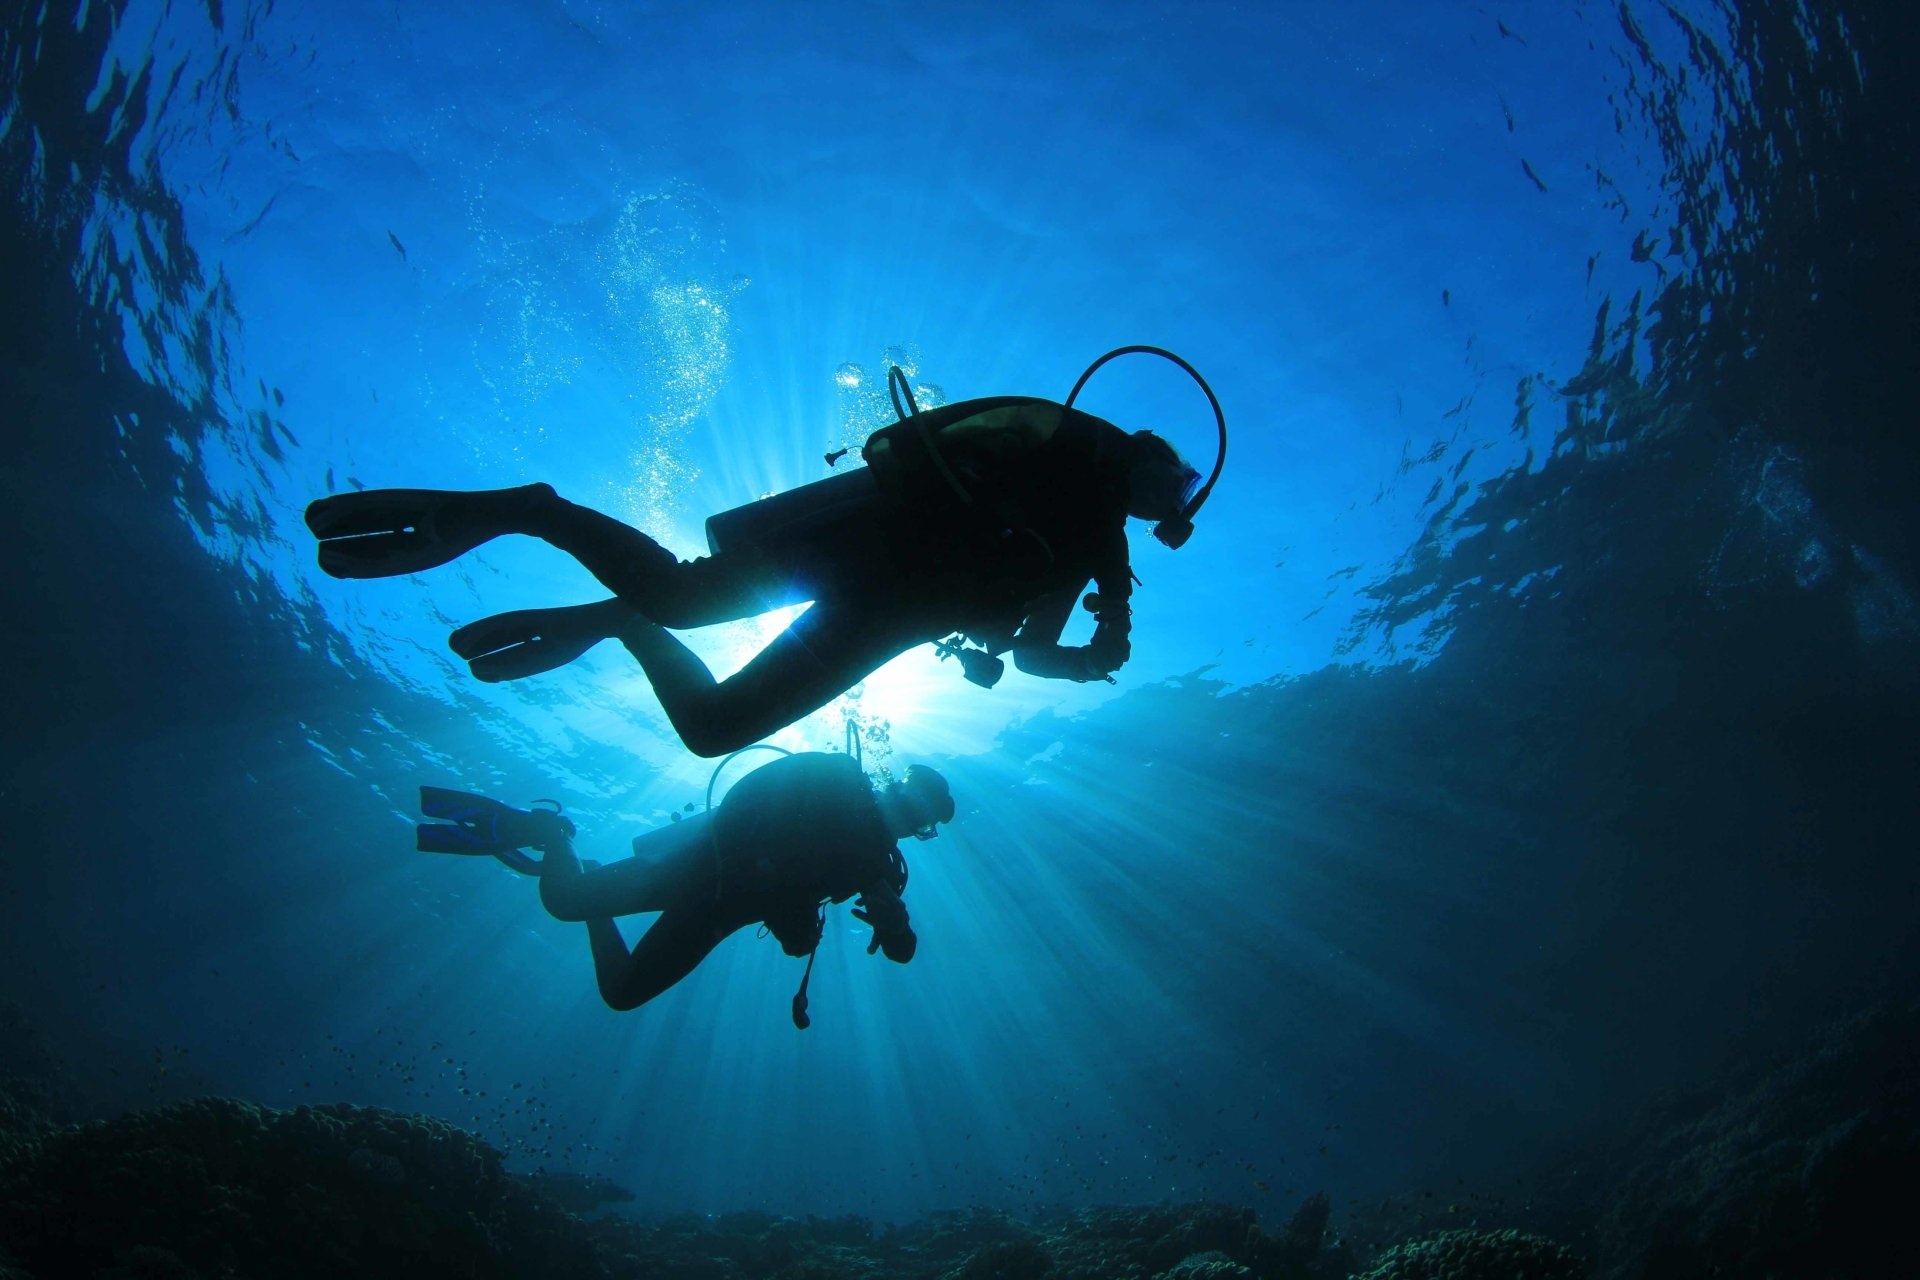 Scuba Diving: An extreme adventurous underwater activity, Swimming underwater for a long time. 1920x1280 HD Wallpaper.